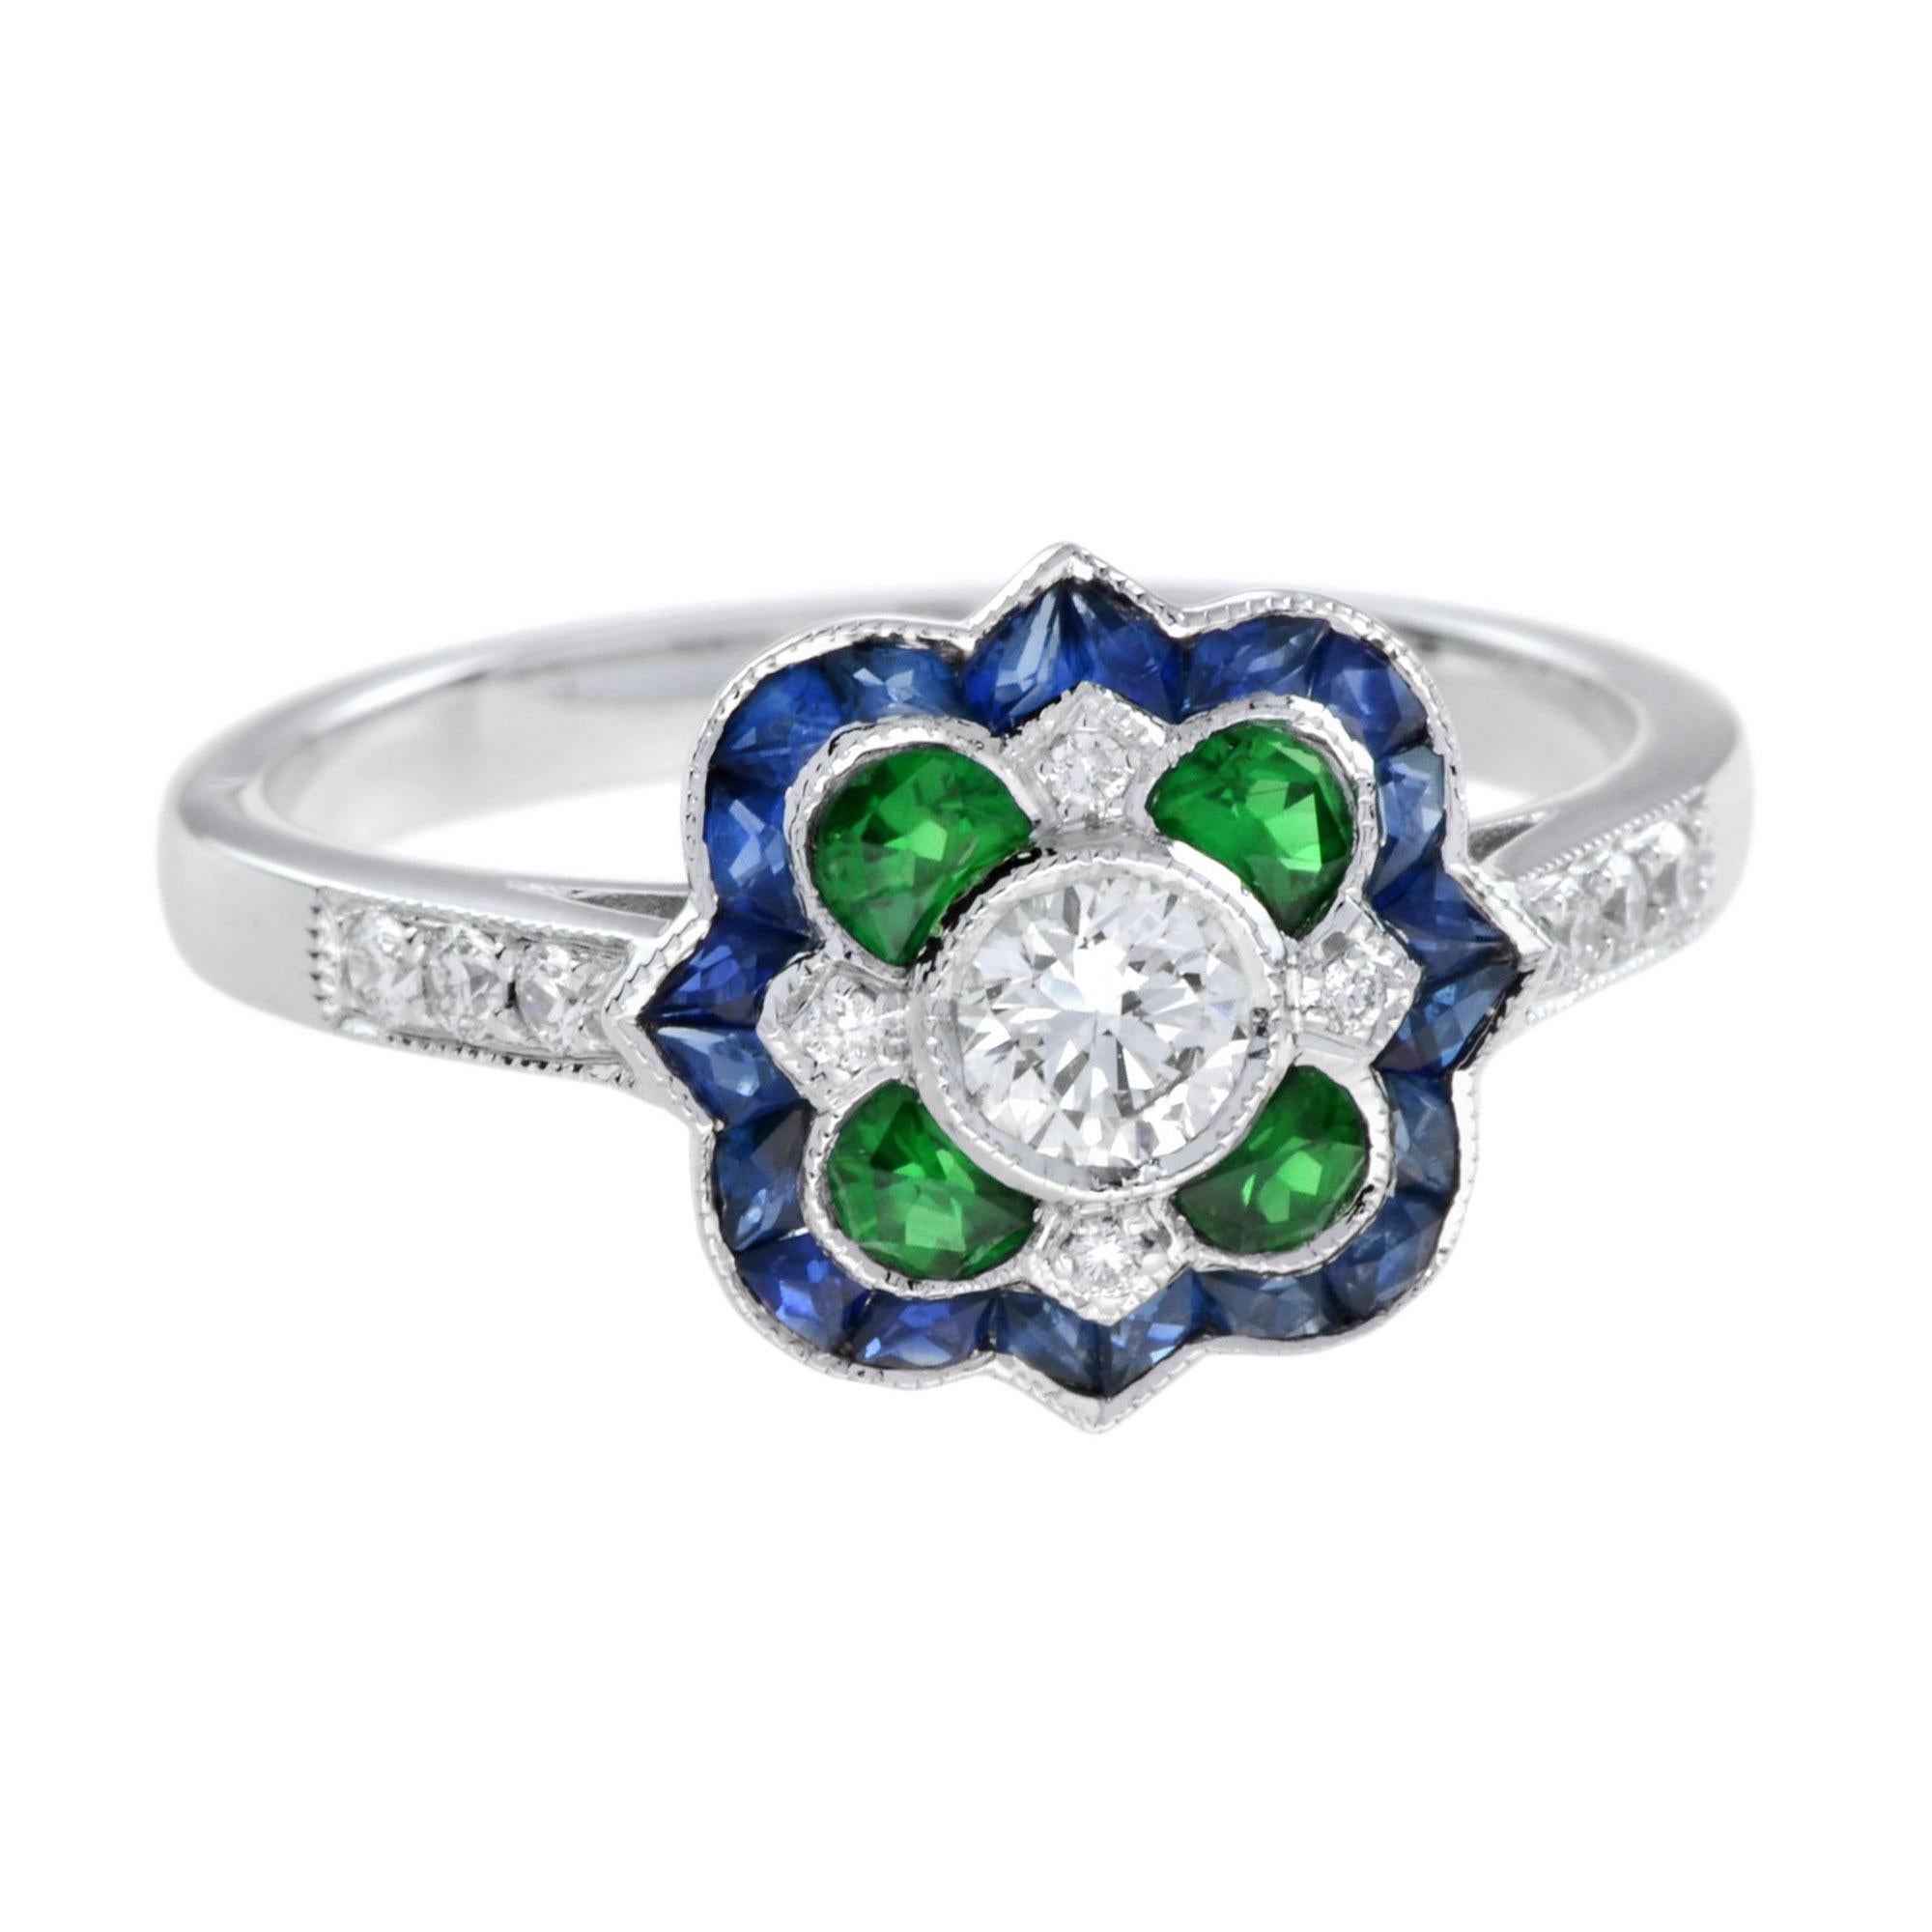 For Sale:  Art Deco Style Diamond with Emerald and Sapphire Ring in 18K White Gold 3